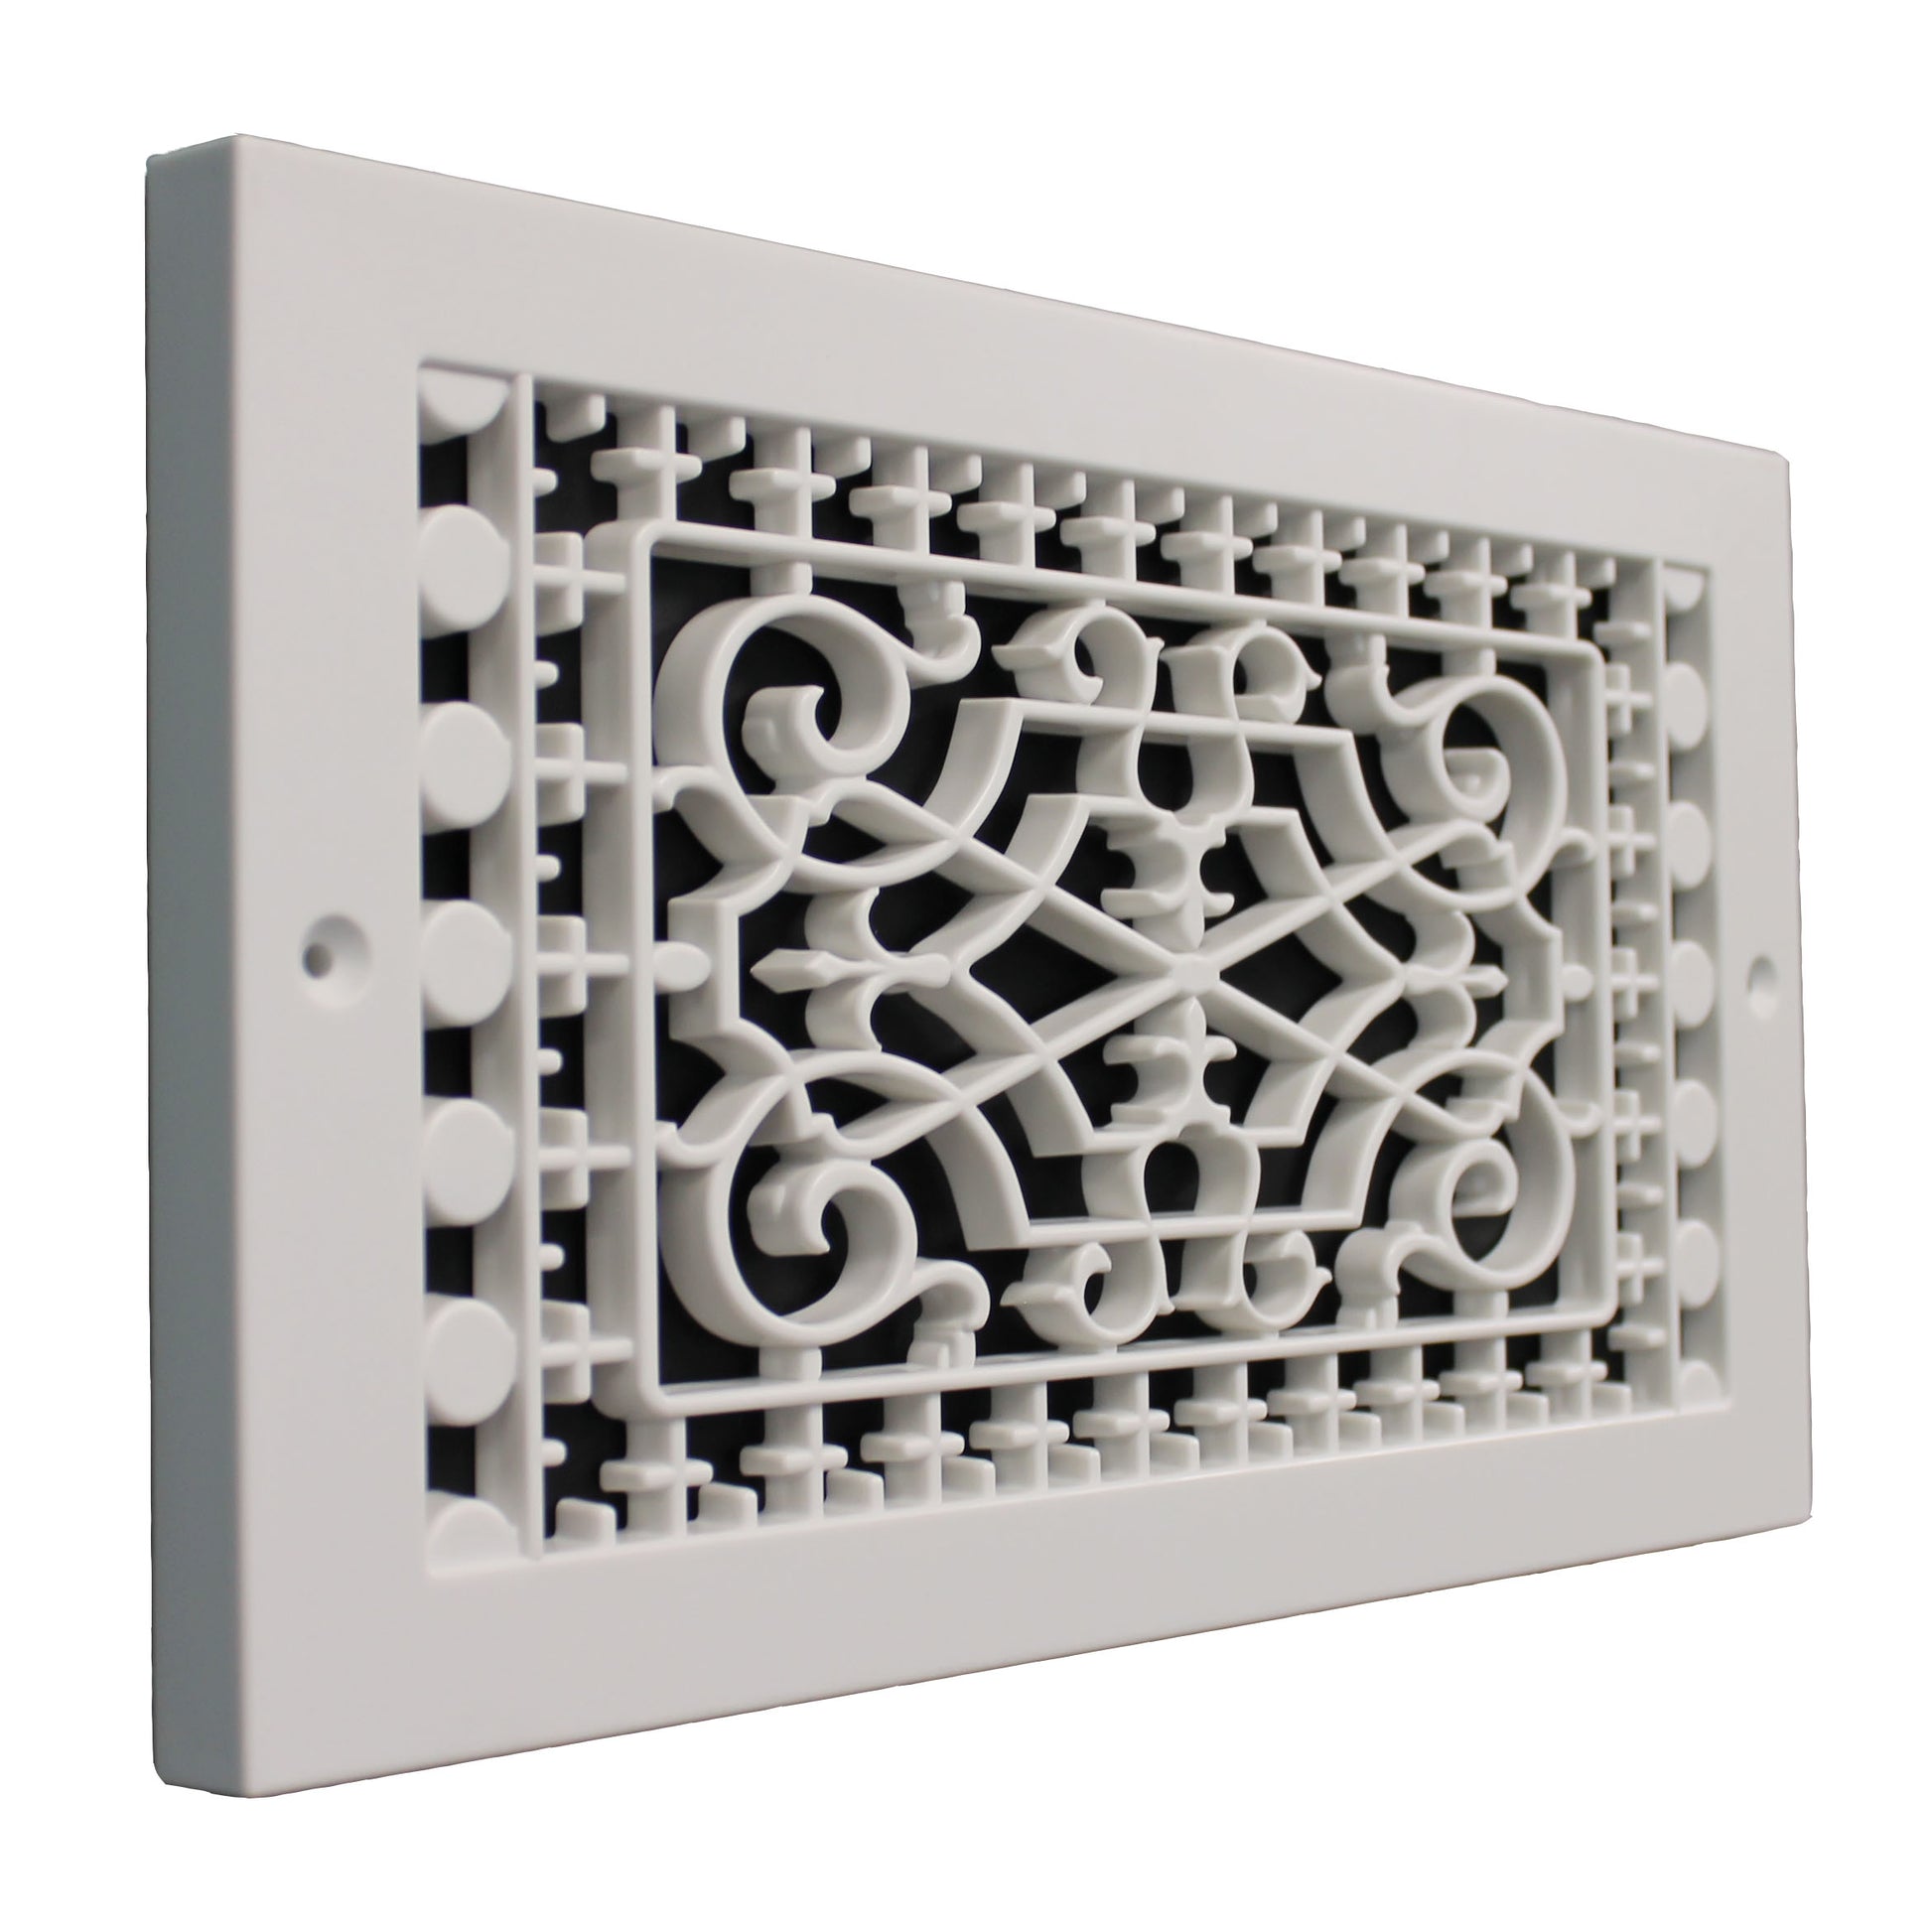 Victorian style decorative baseboard vent cover with the dimensions 6" in x 12" in